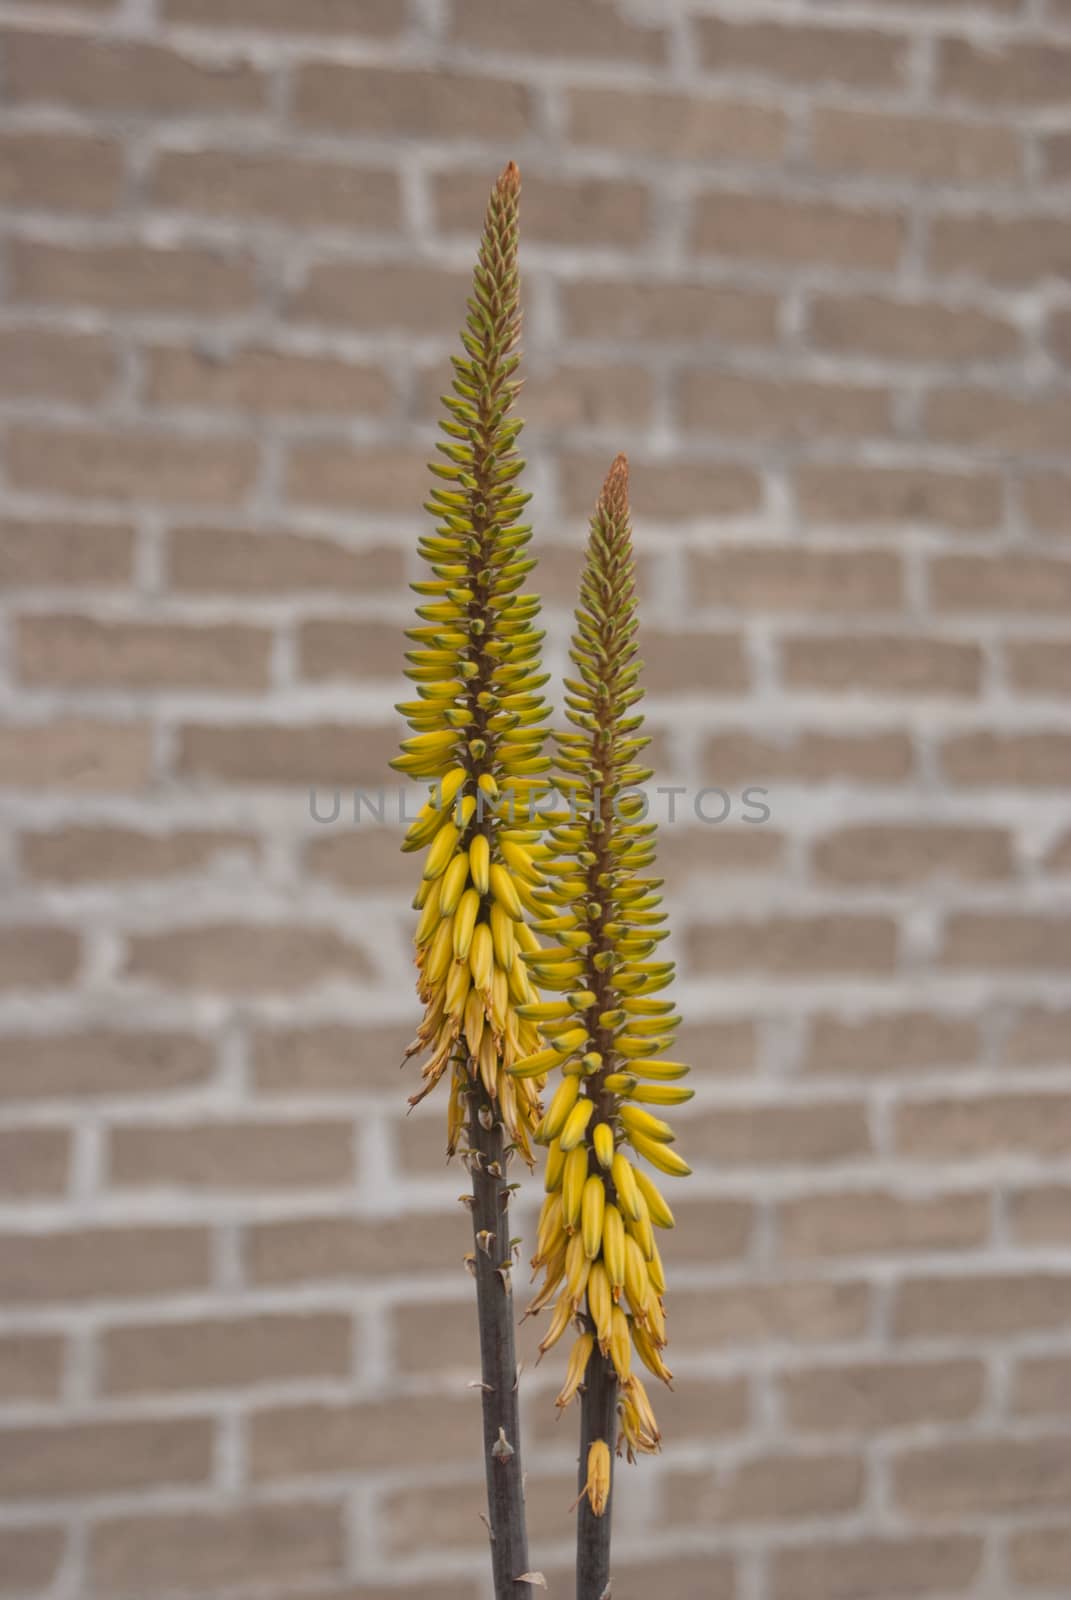 Tall flowers on brick wall by emattil